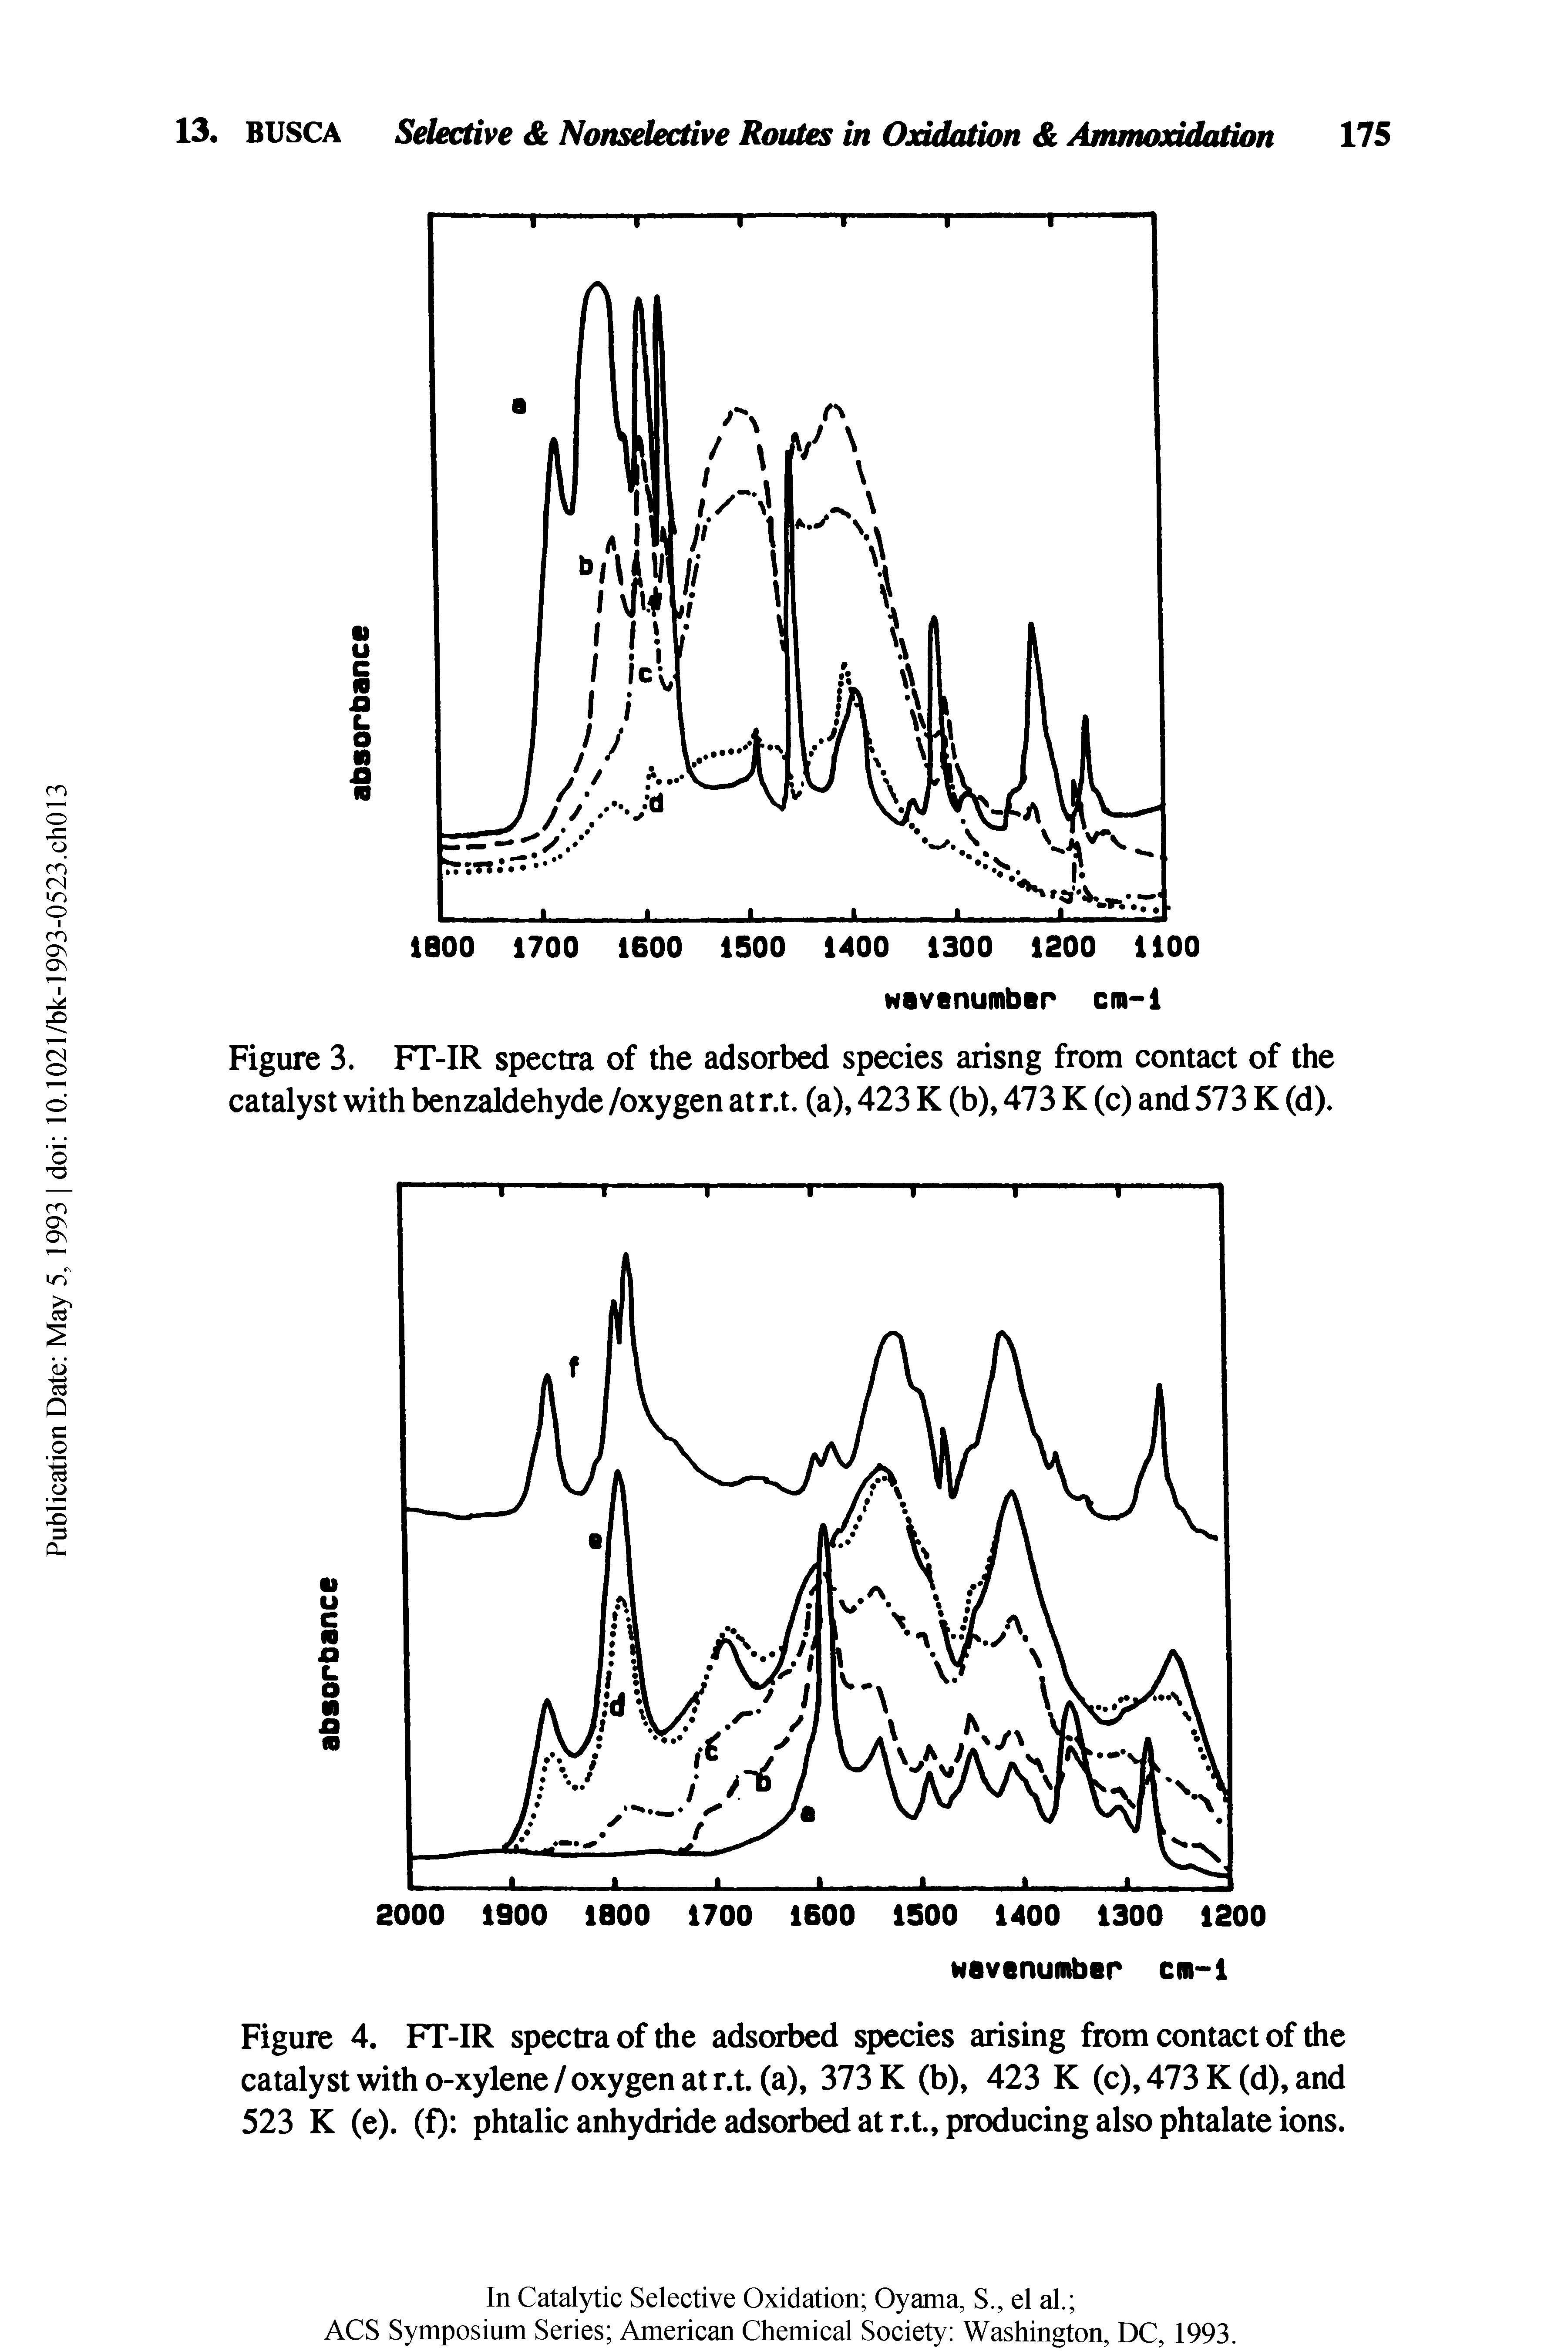 Figure 4. FT-IR spectra of the adsorbed species arising from contact of the catalyst with o-xylene/oxygen at r.t. (a), 373 K (b), 423 K (c), 473 K (d), and 523 K (e). (f) phtalic anhydride adsorbed at r.t., producing also phtalate ions.